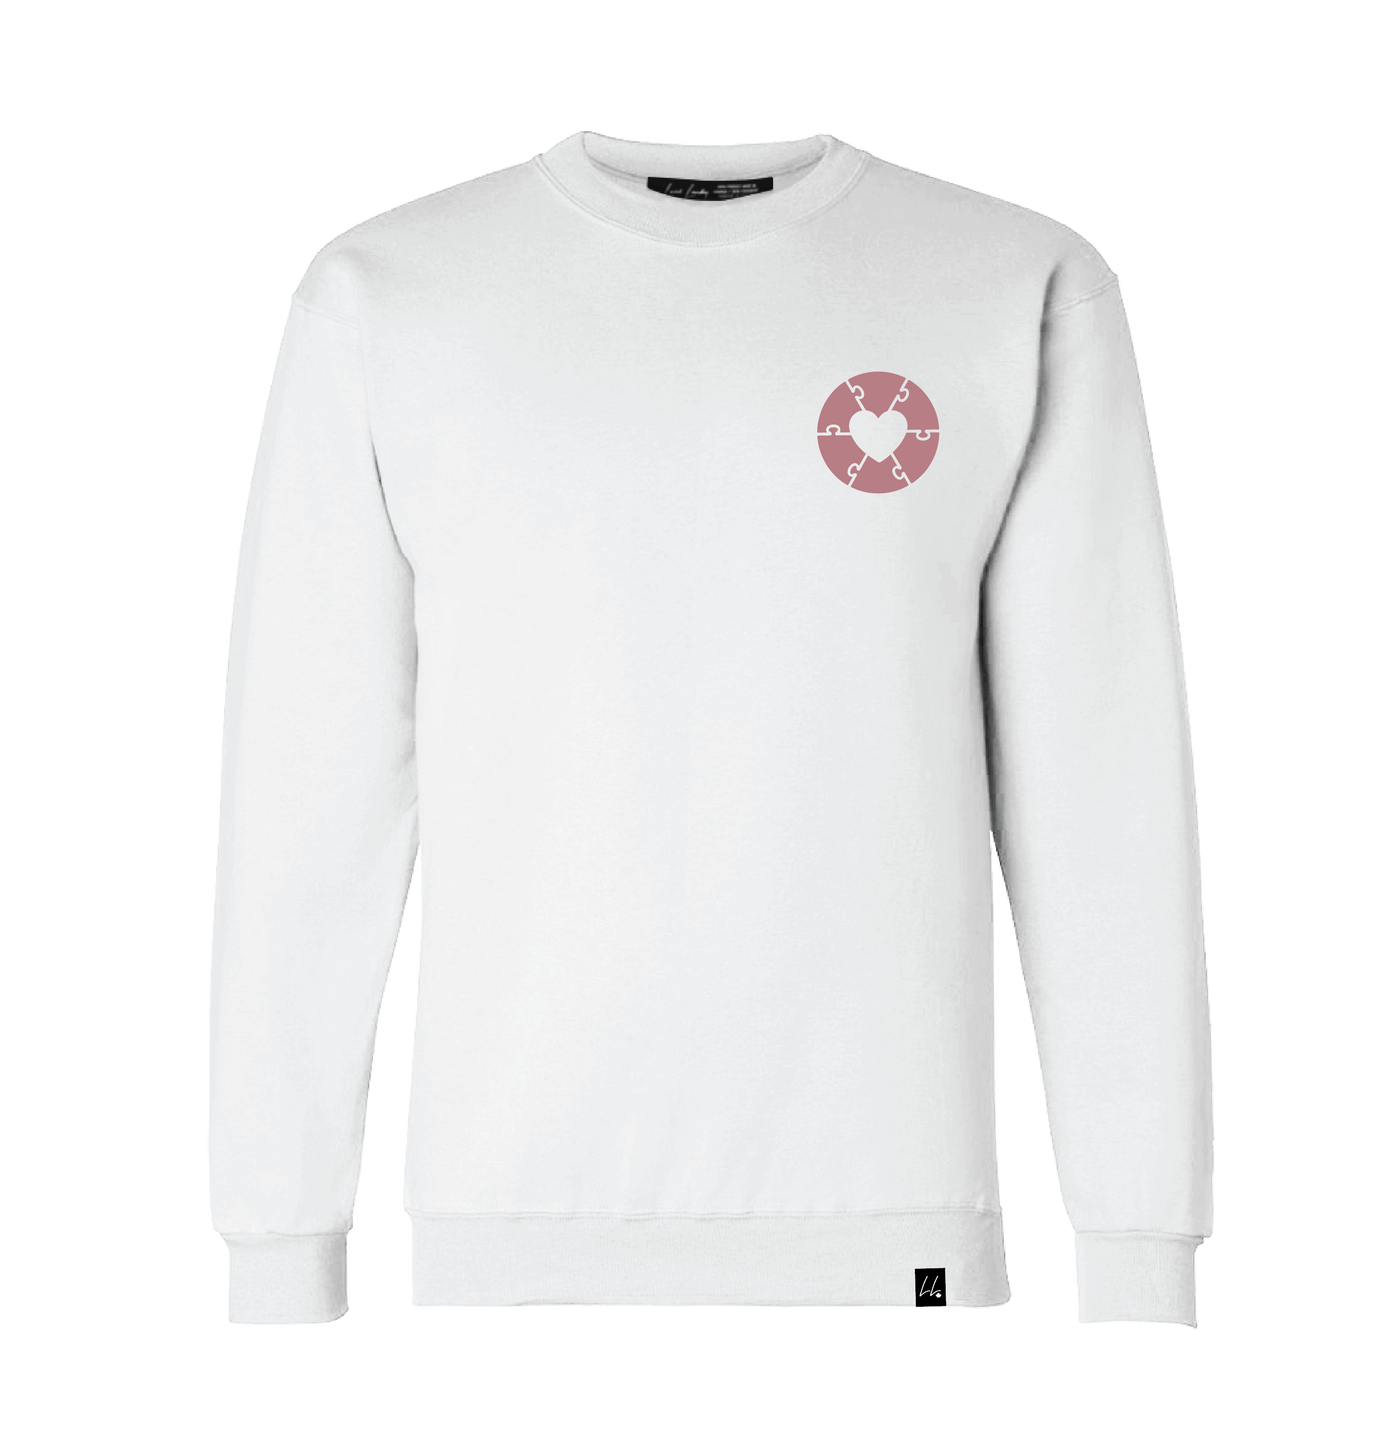 Made in Canada sweater featuring the Ryder's foundation heart logo on the left chest. Sustainable clothing that supports communities and focuses on bringing everyone together.